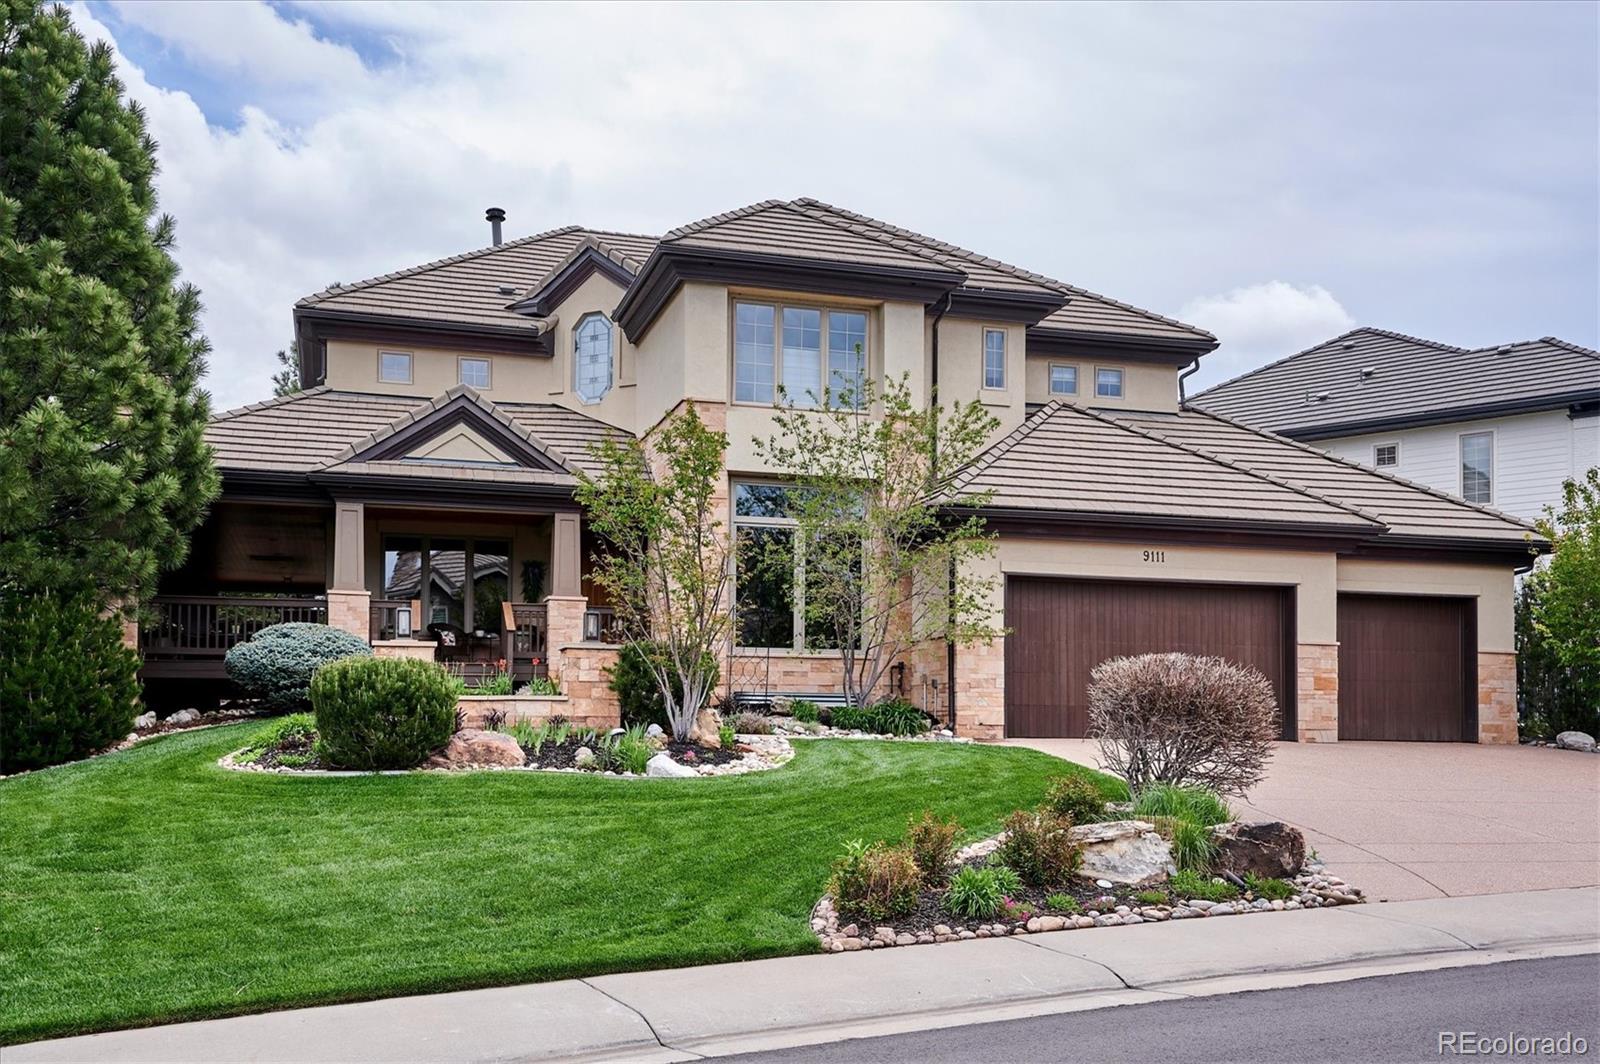 9111 S Lost Hill Drive, lone tree MLS: 5409415 Beds: 5 Baths: 5 Price: $1,899,000